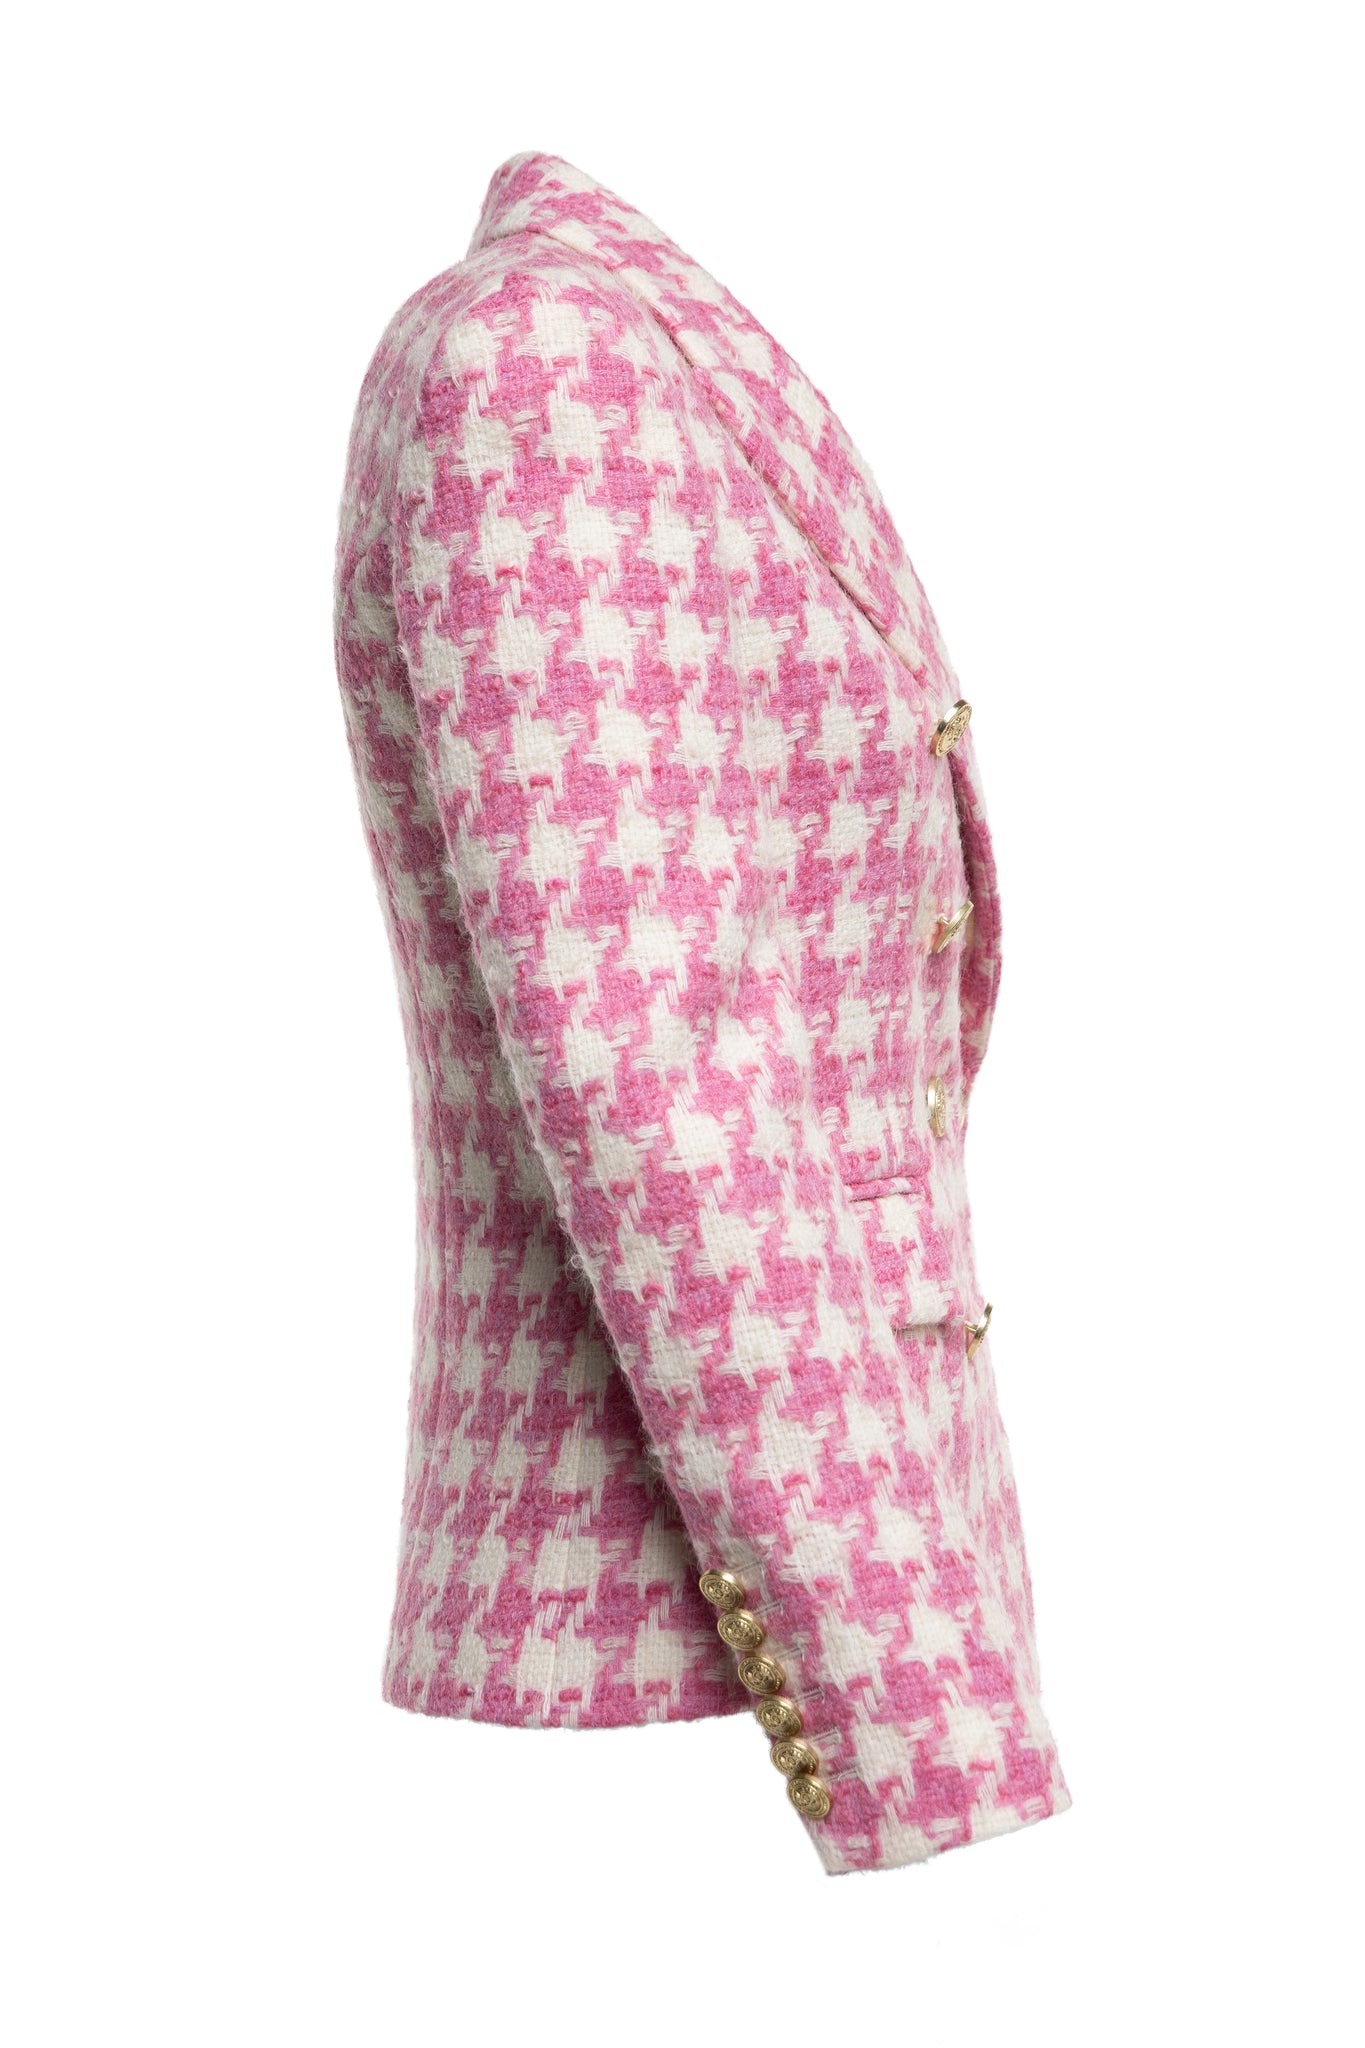 side of pink and white large scale houndstooth fitted blazer double breasted style but with only single button fastening to the one central button for more form fitted tailored look finished with two pockets at hips and gold button details on front and cuffs